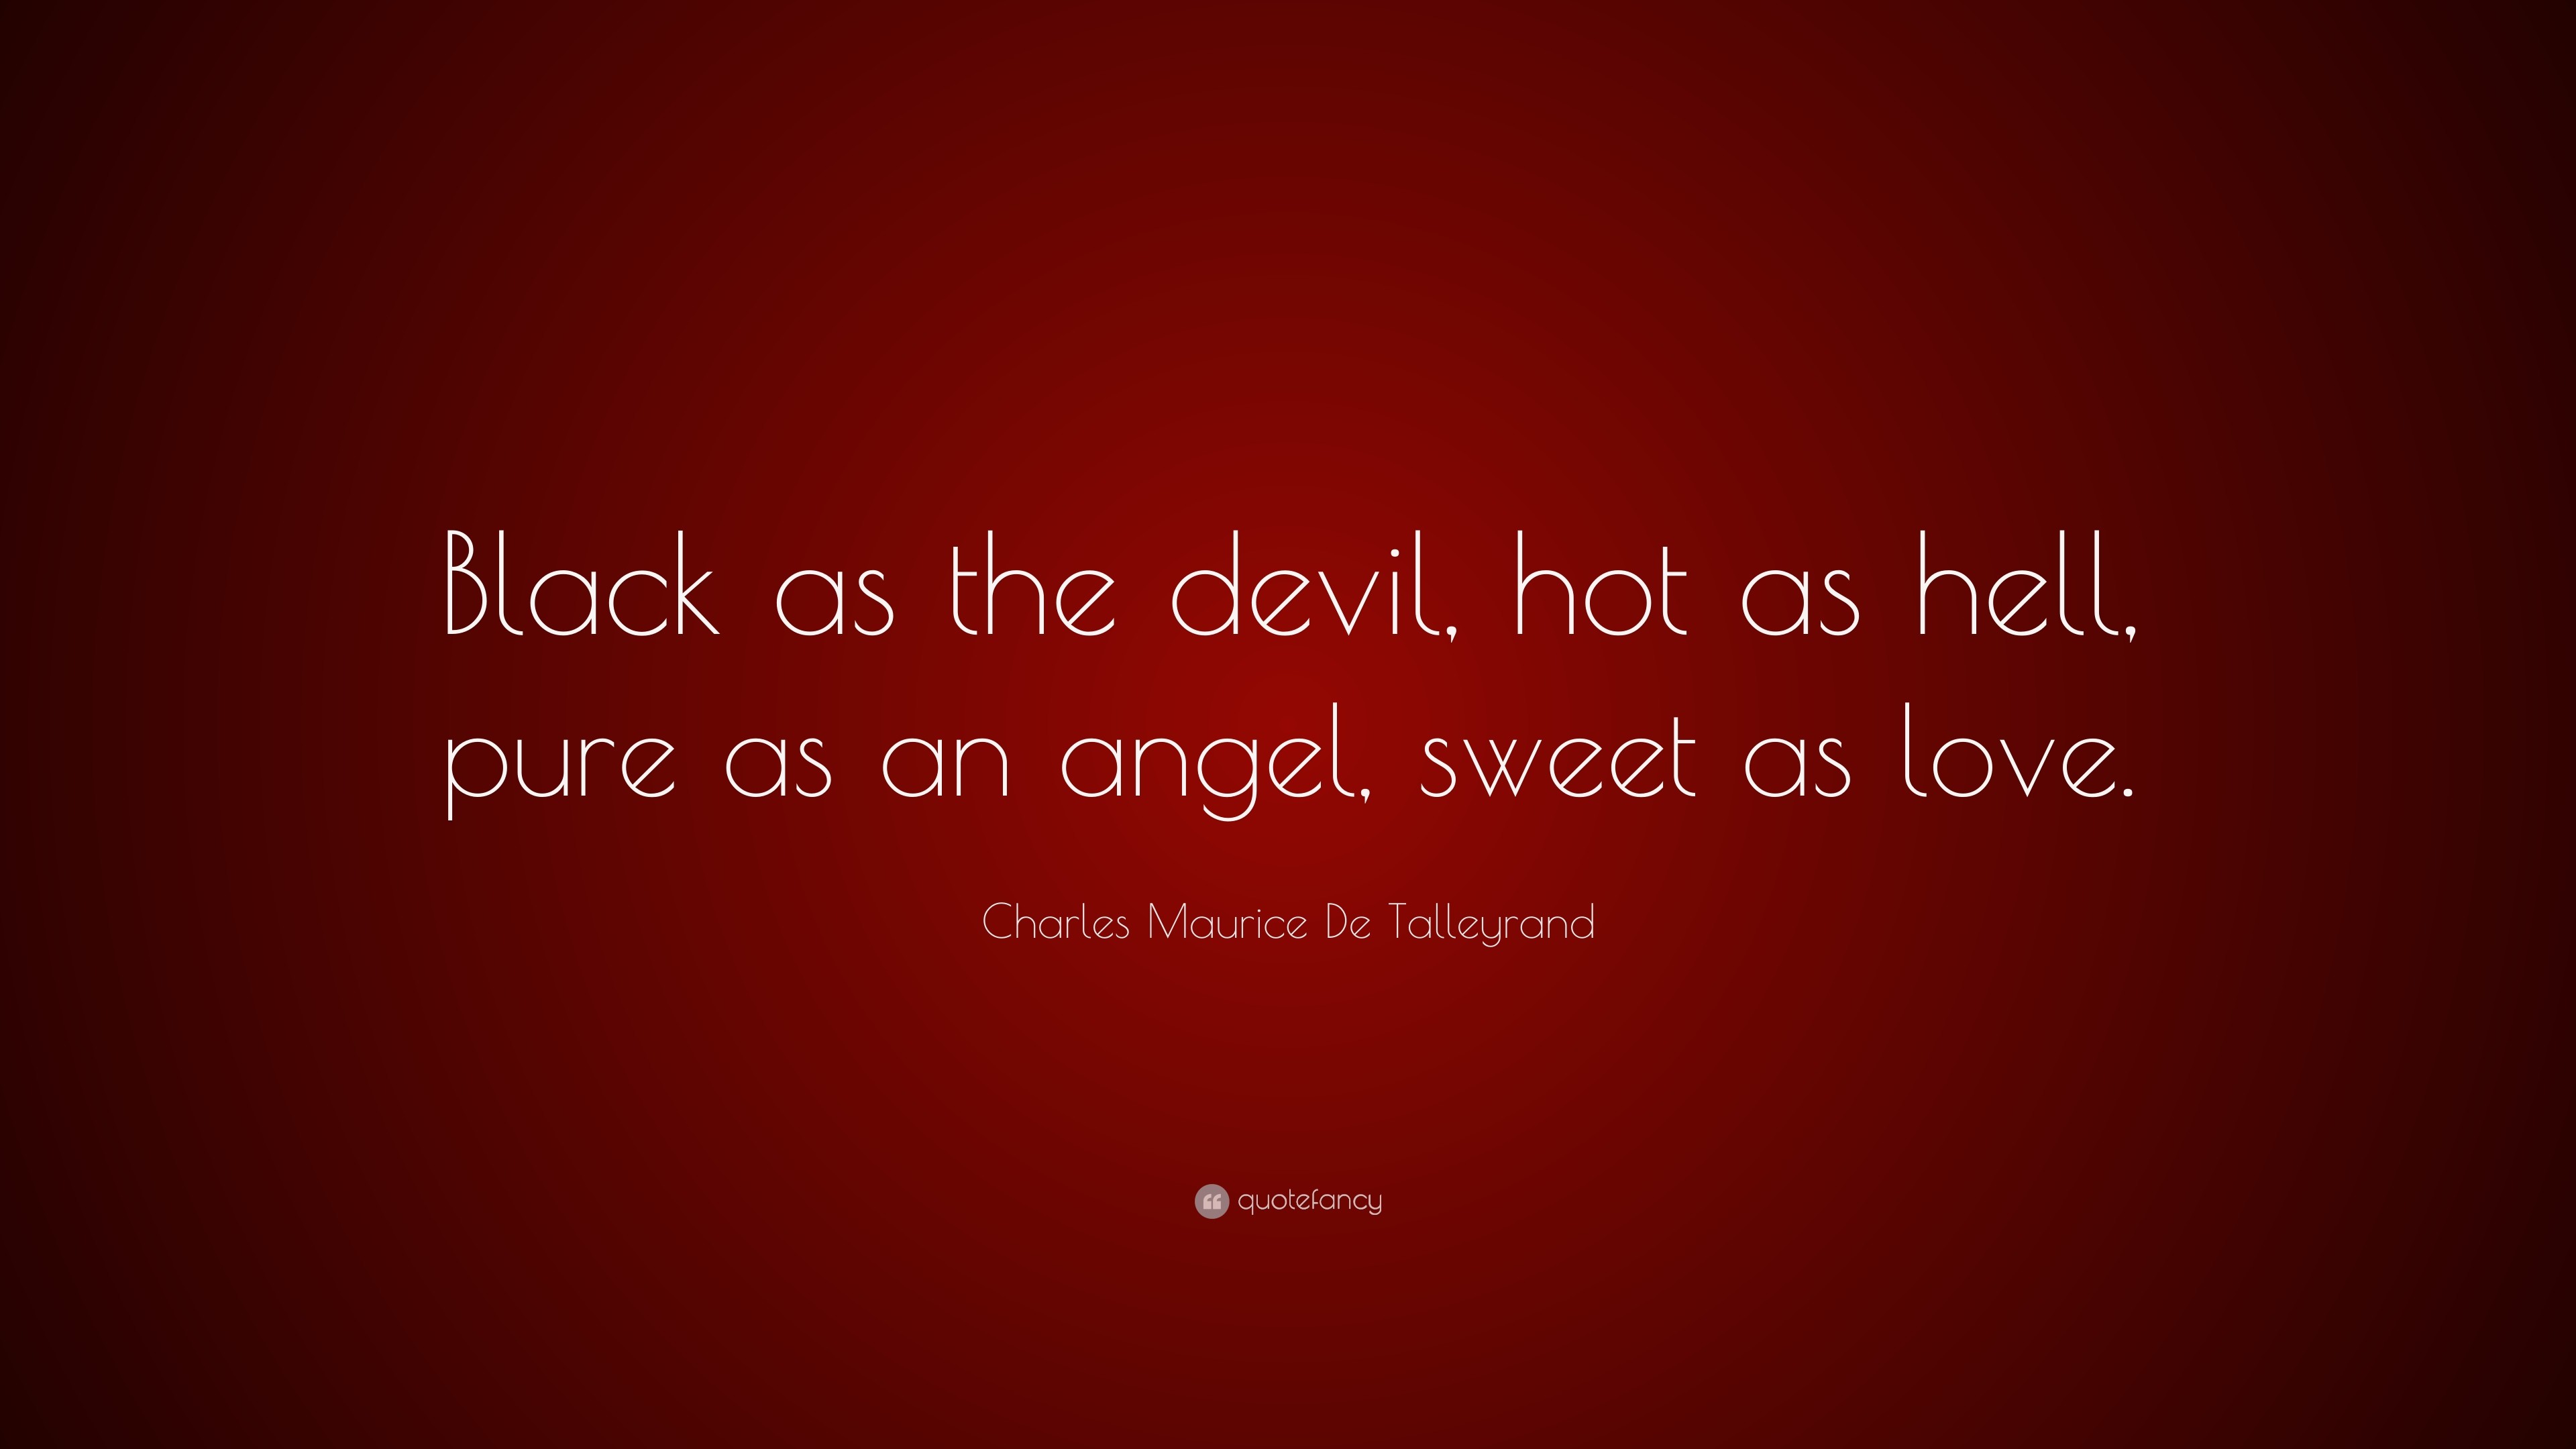 3840x2160 Charles Maurice De Talleyrand Quote: “Black as the devil, hot as hell,